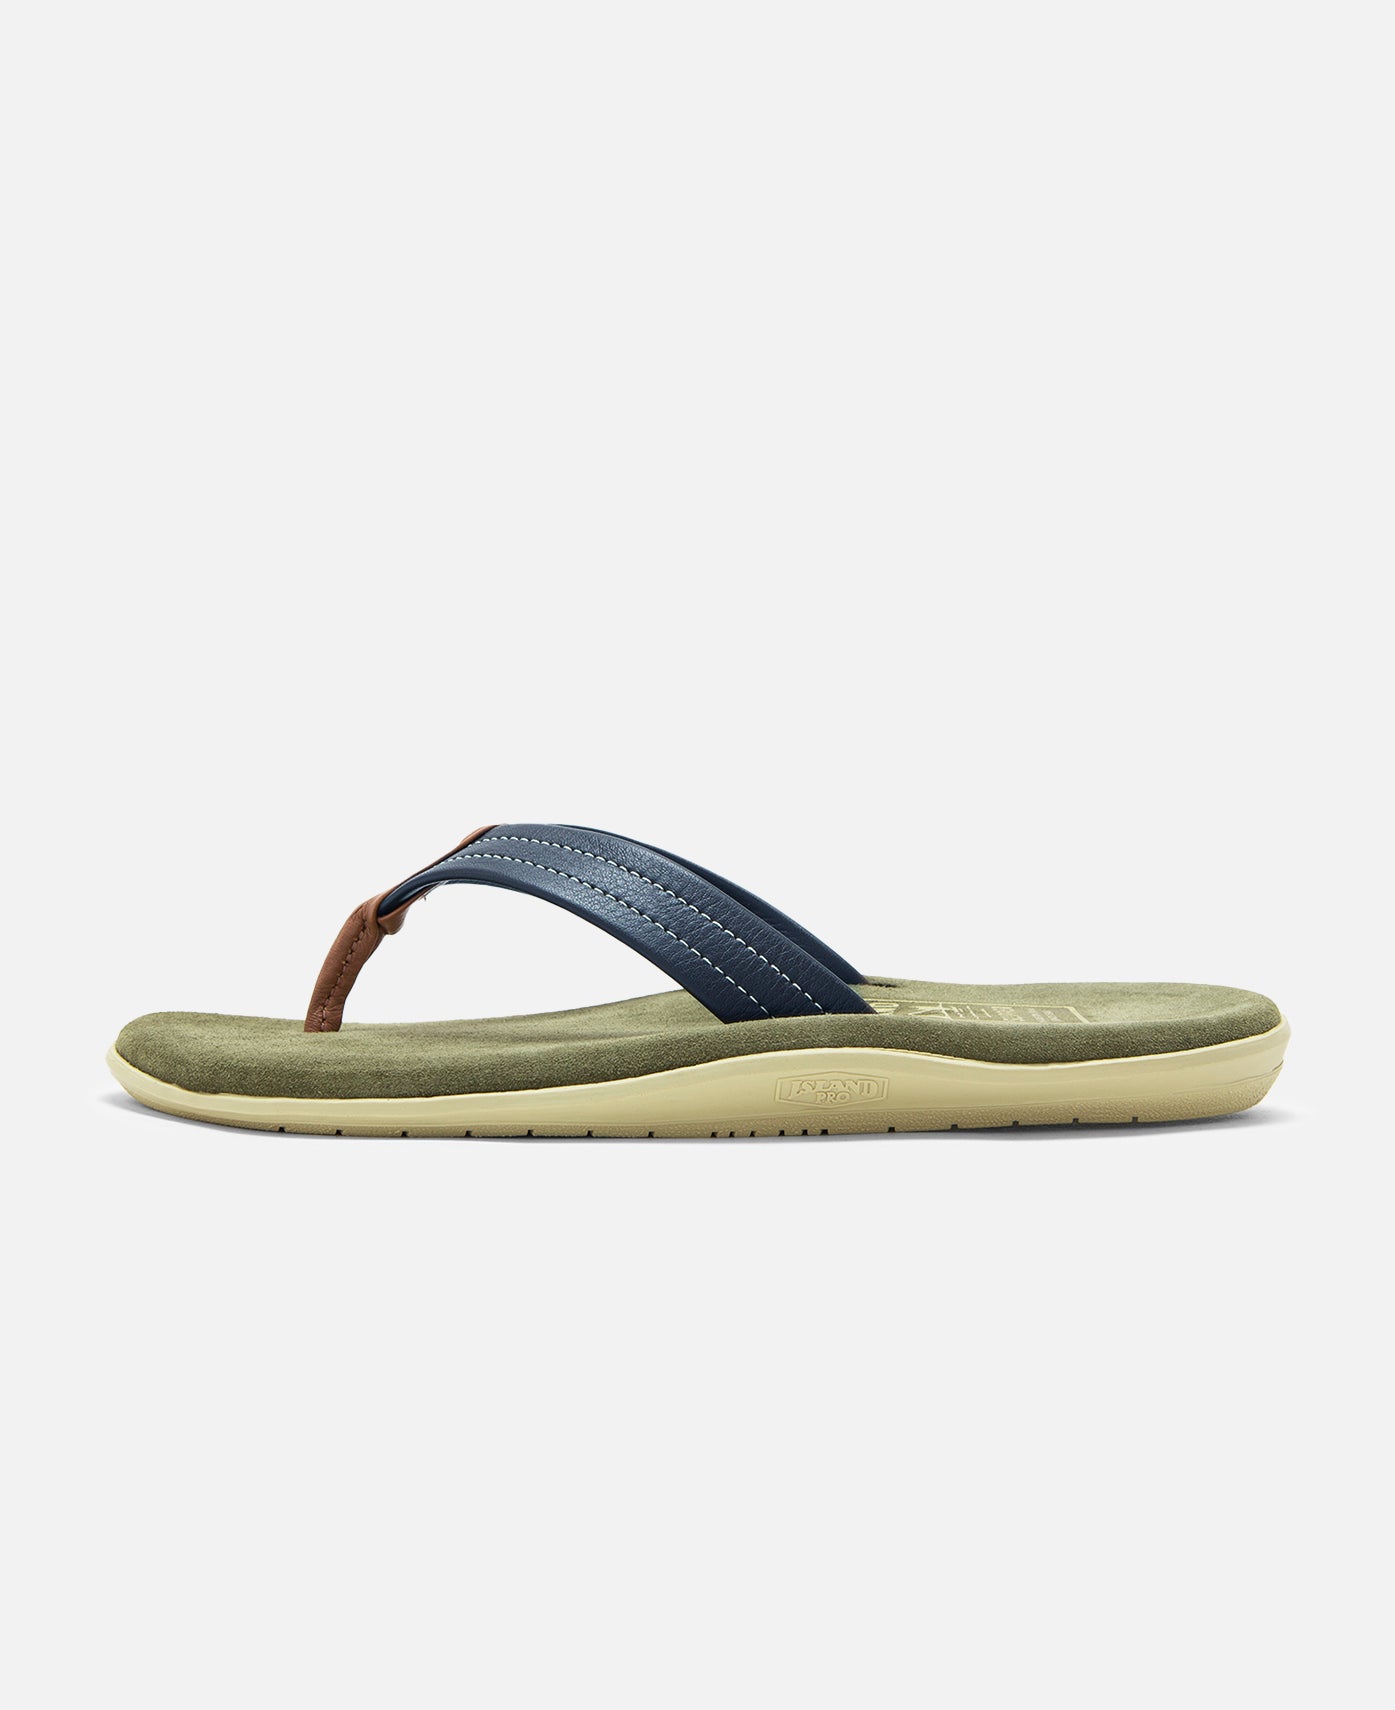 Island Slipper - Mixed Leather (Olive) – JUICESTORE